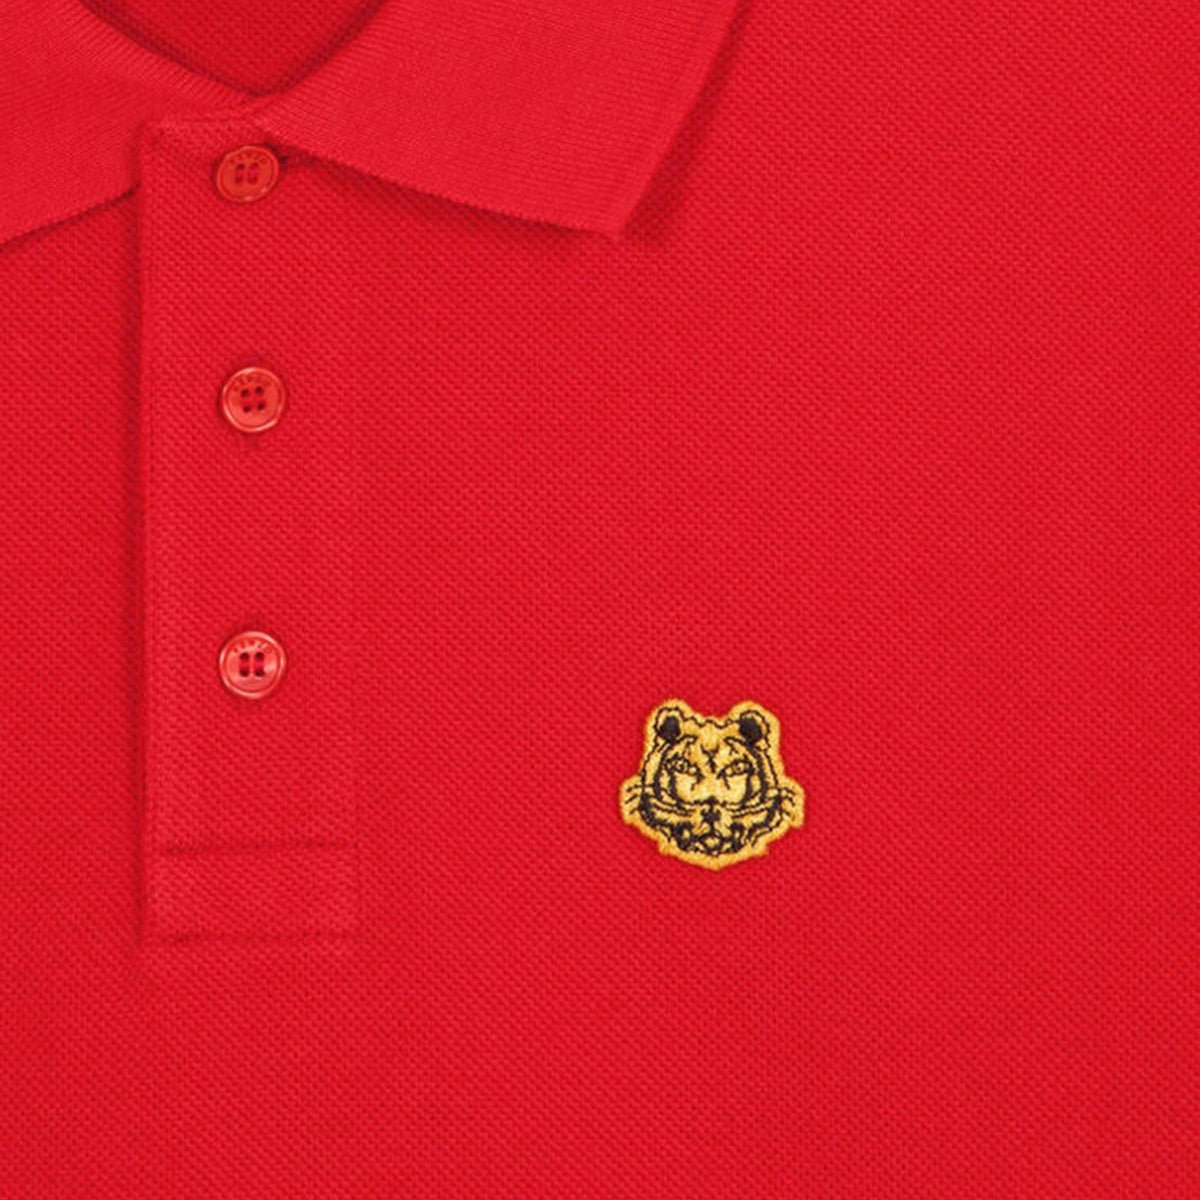 Kenzo Men's 'Year of The Tiger' Tiger Crest Polo Shirt